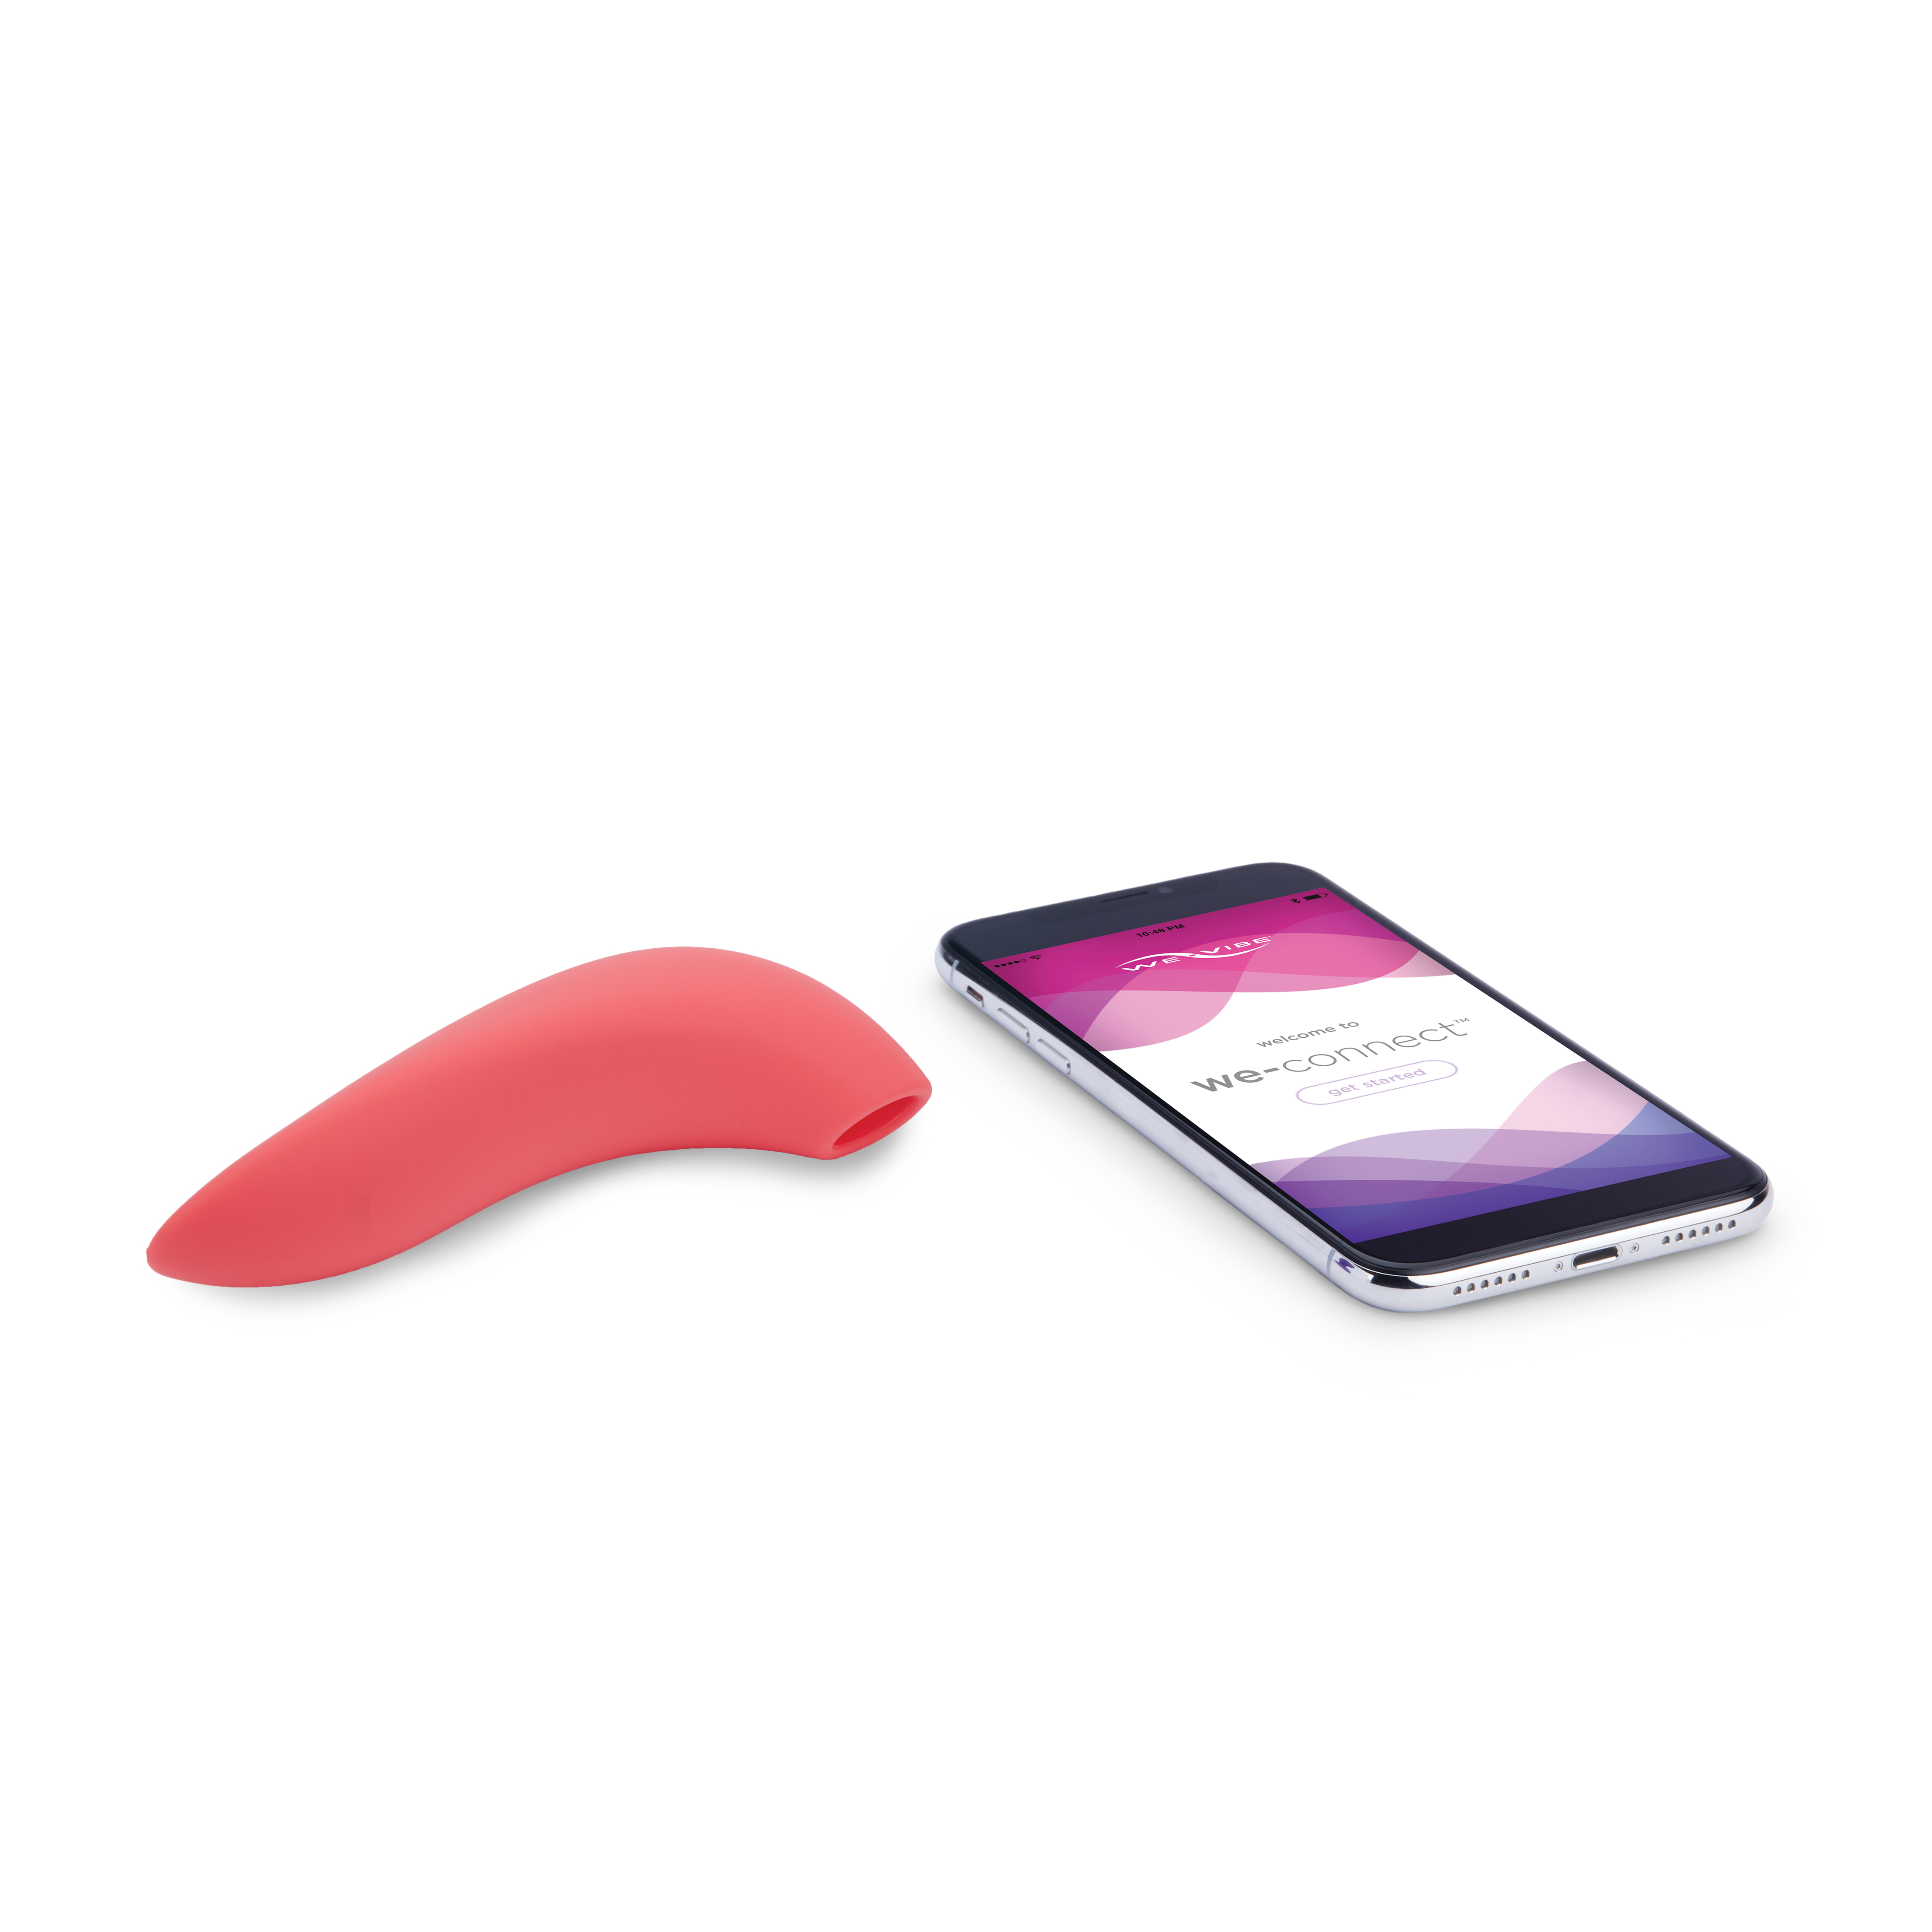 We-Vibe melt next to phone with app open